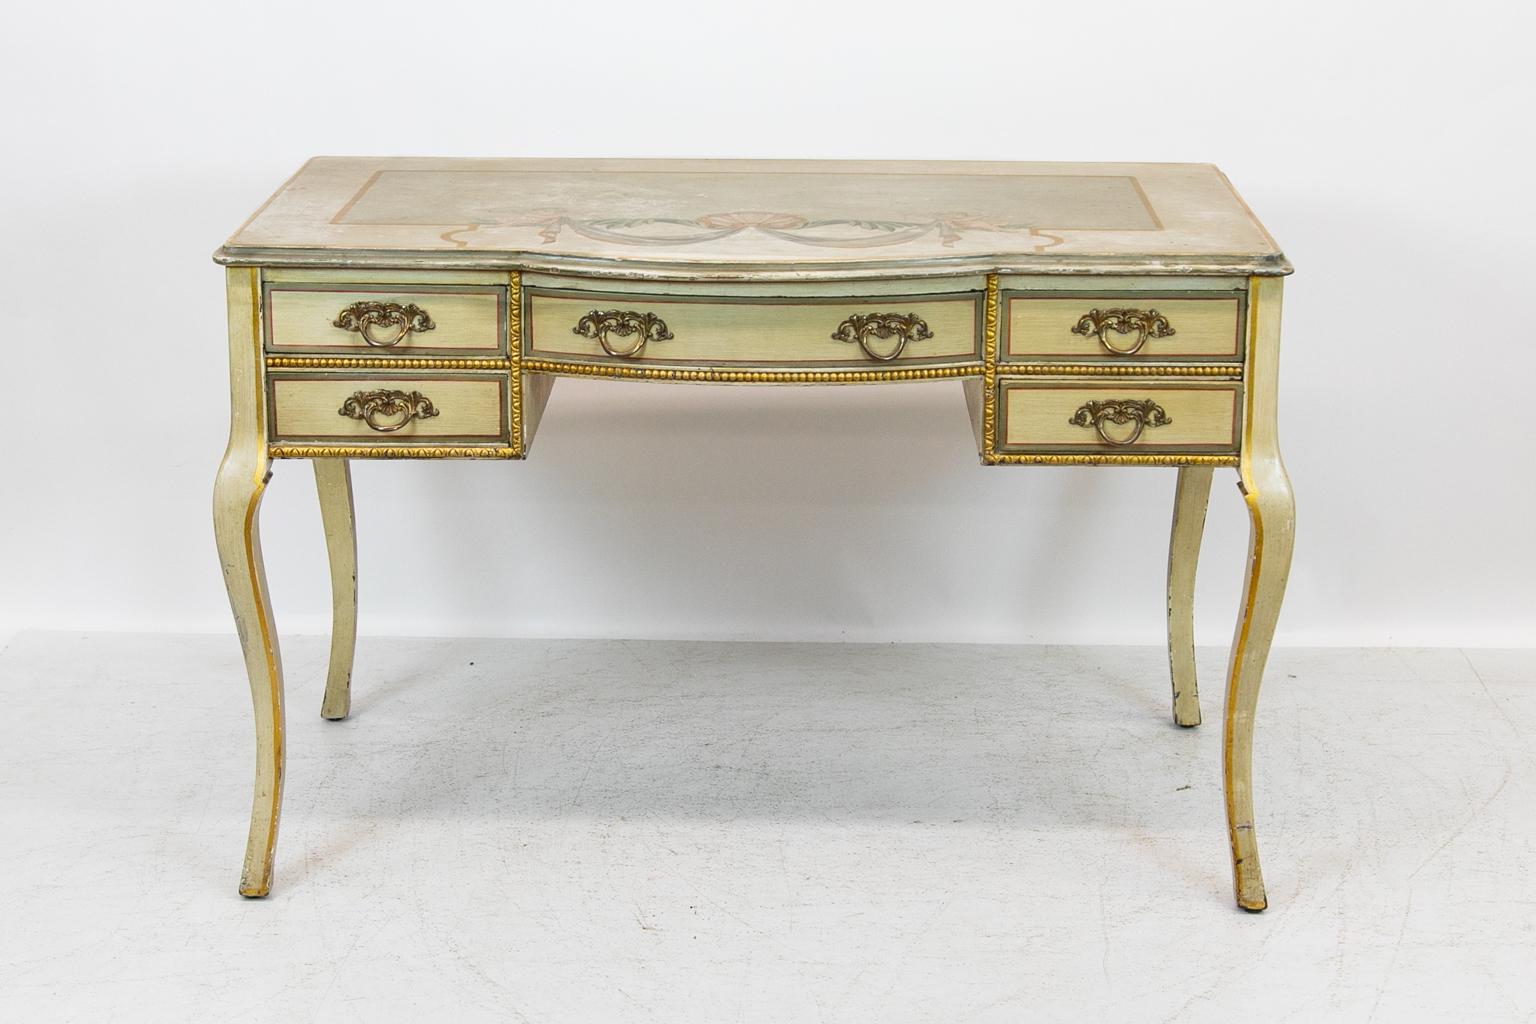 English five-drawer dressing table is painted with cupids holding swag draperies connecting to a center scallop shell. The drawers have faux painted crossbanding, and the sides have raised panels.
  